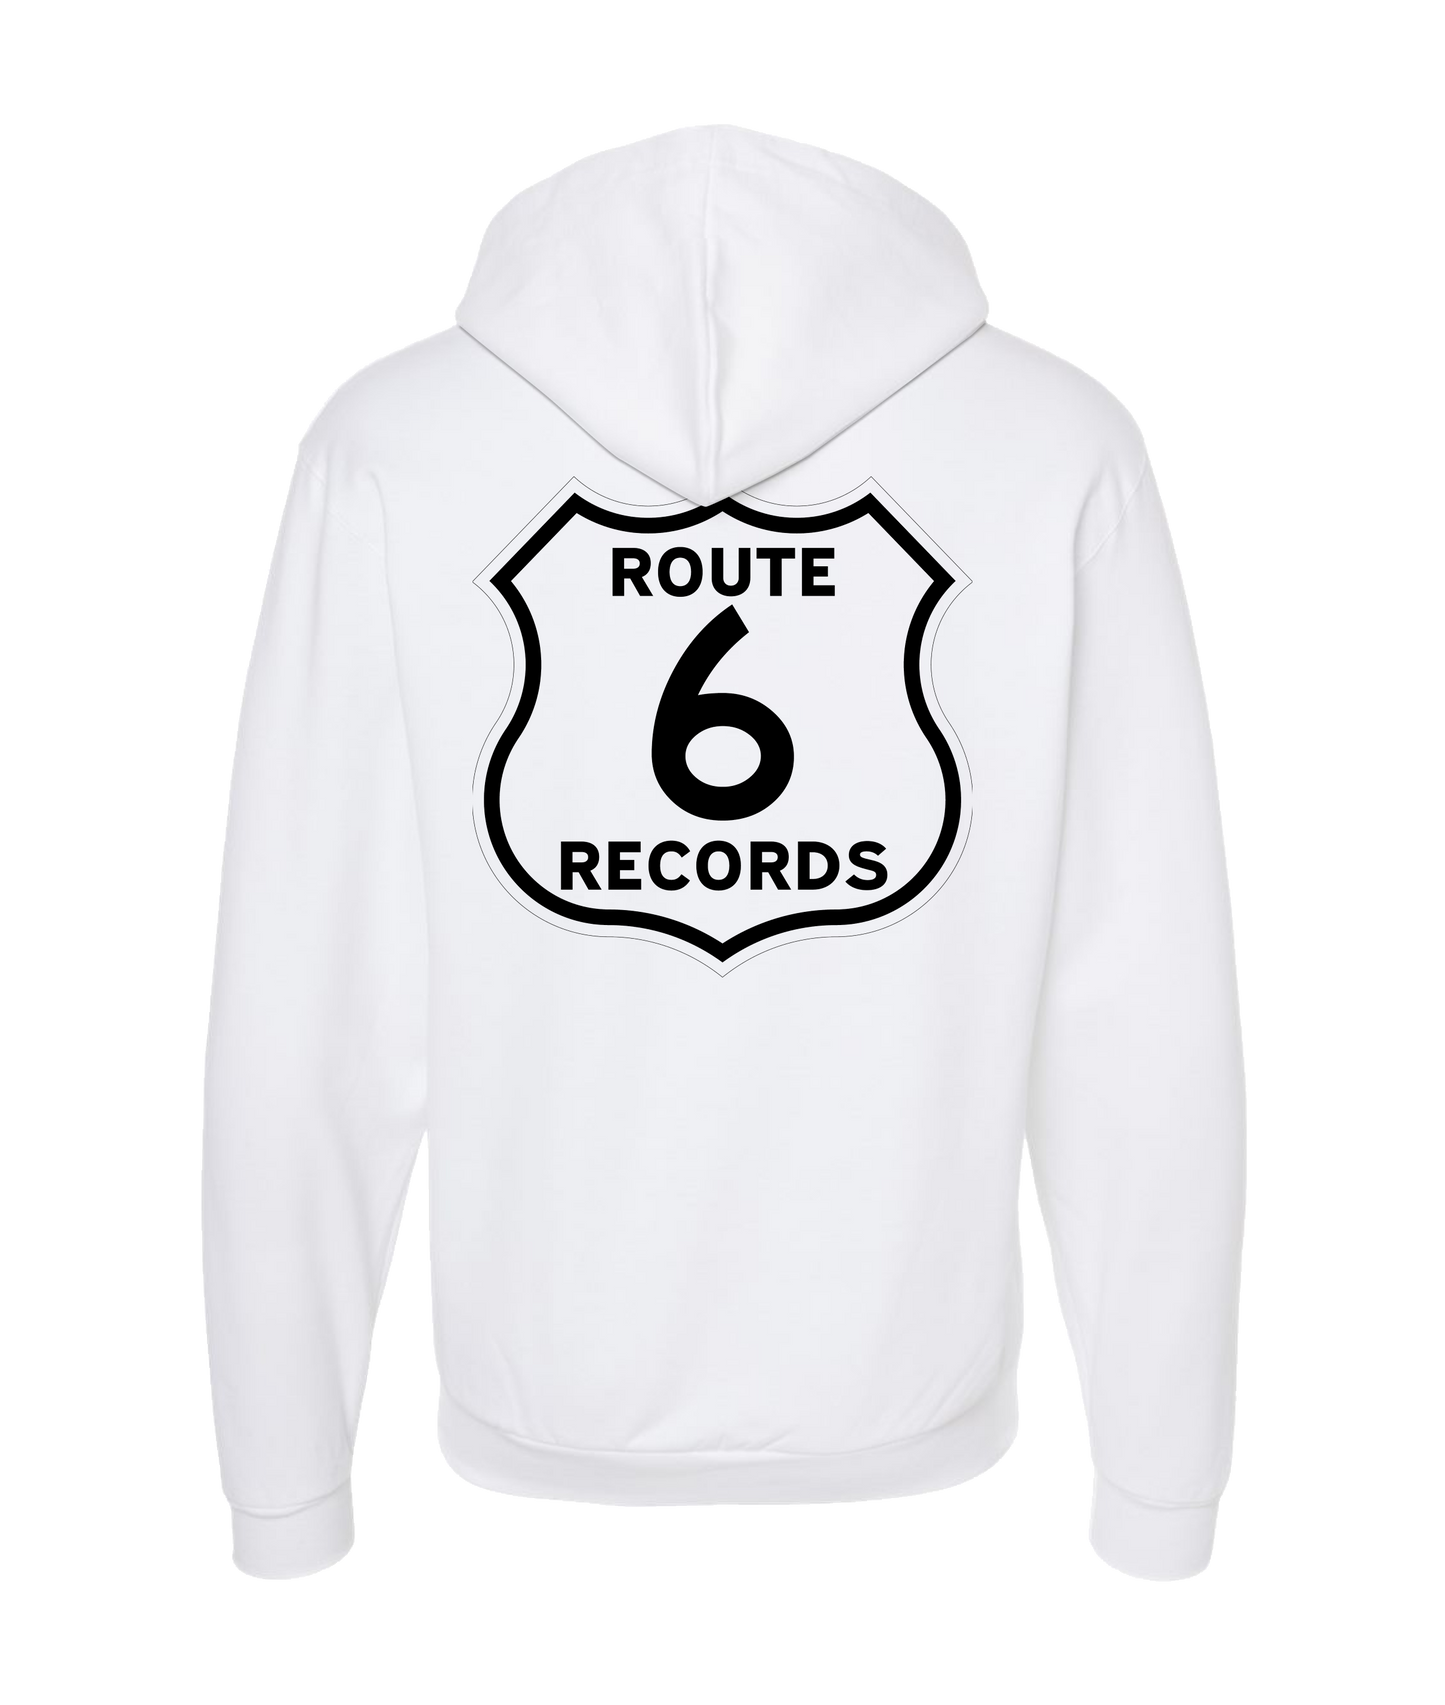 Route 6 Records - Route 6 Sign Logo - Black Zip Up Hoodie